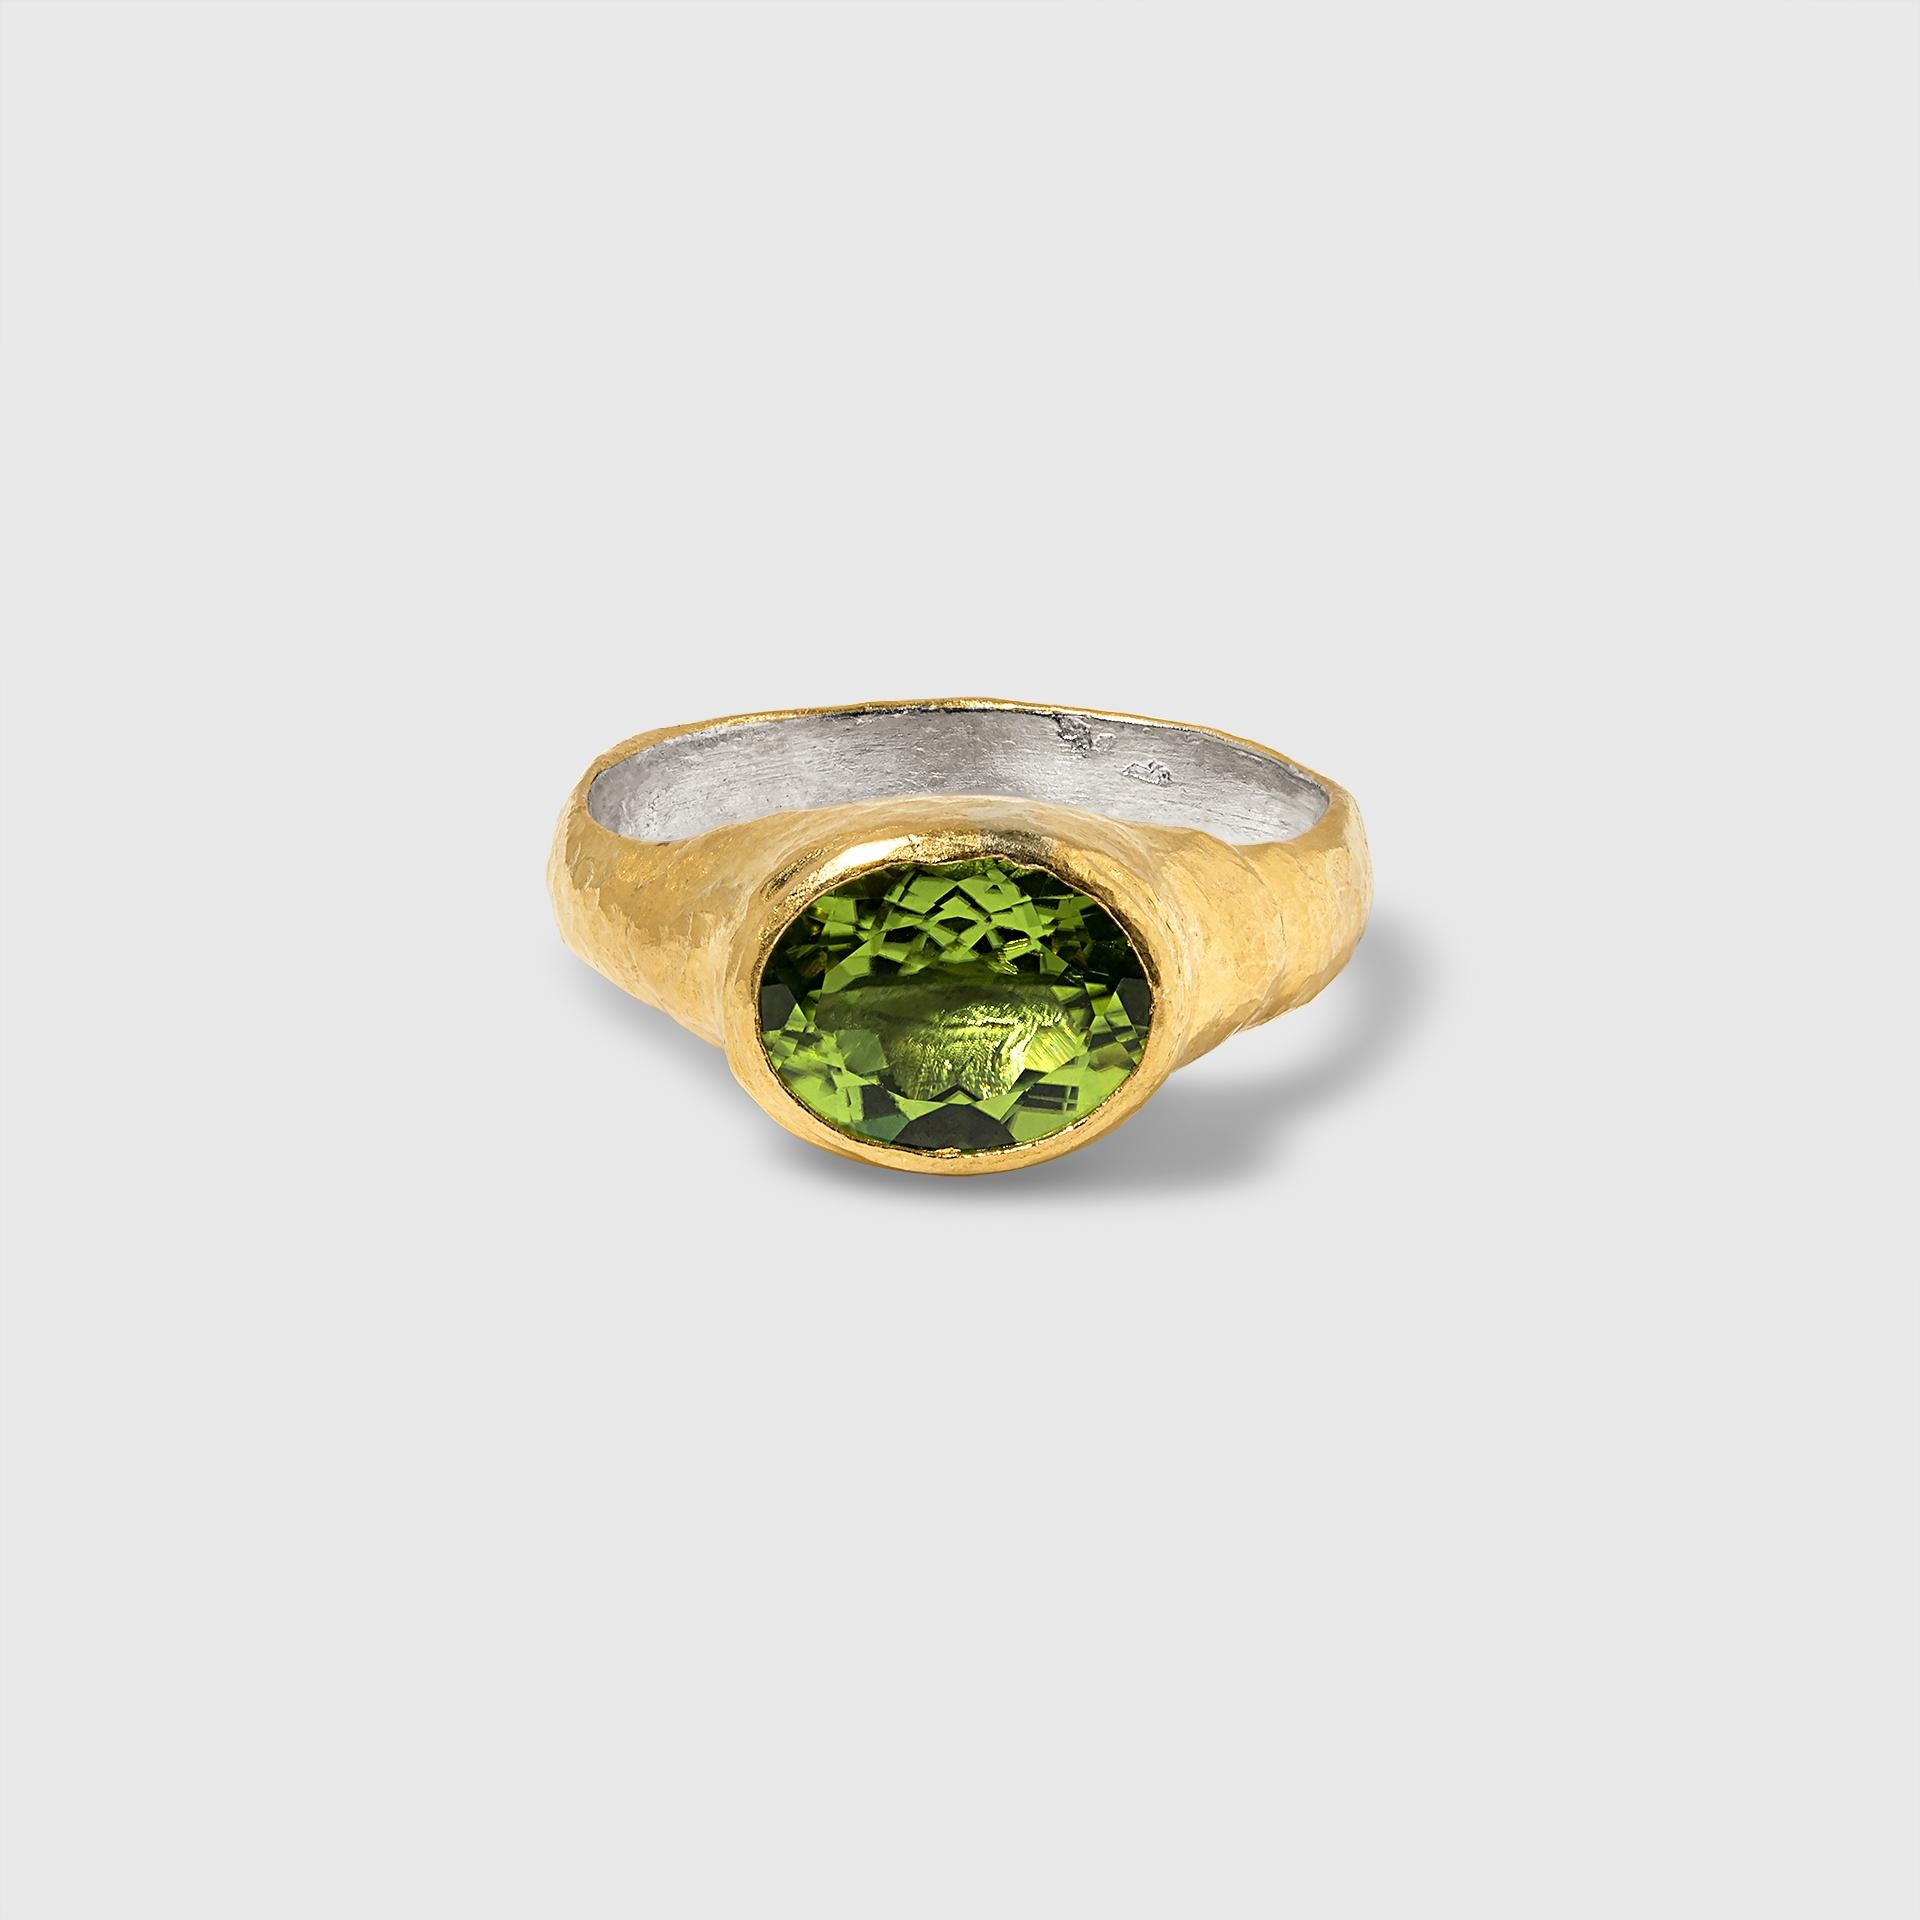 2.75ct Oval Peridot Ring with 24kt and Silver by Prehistoric Works of Istanbul, Turkey. 7 3/4 US